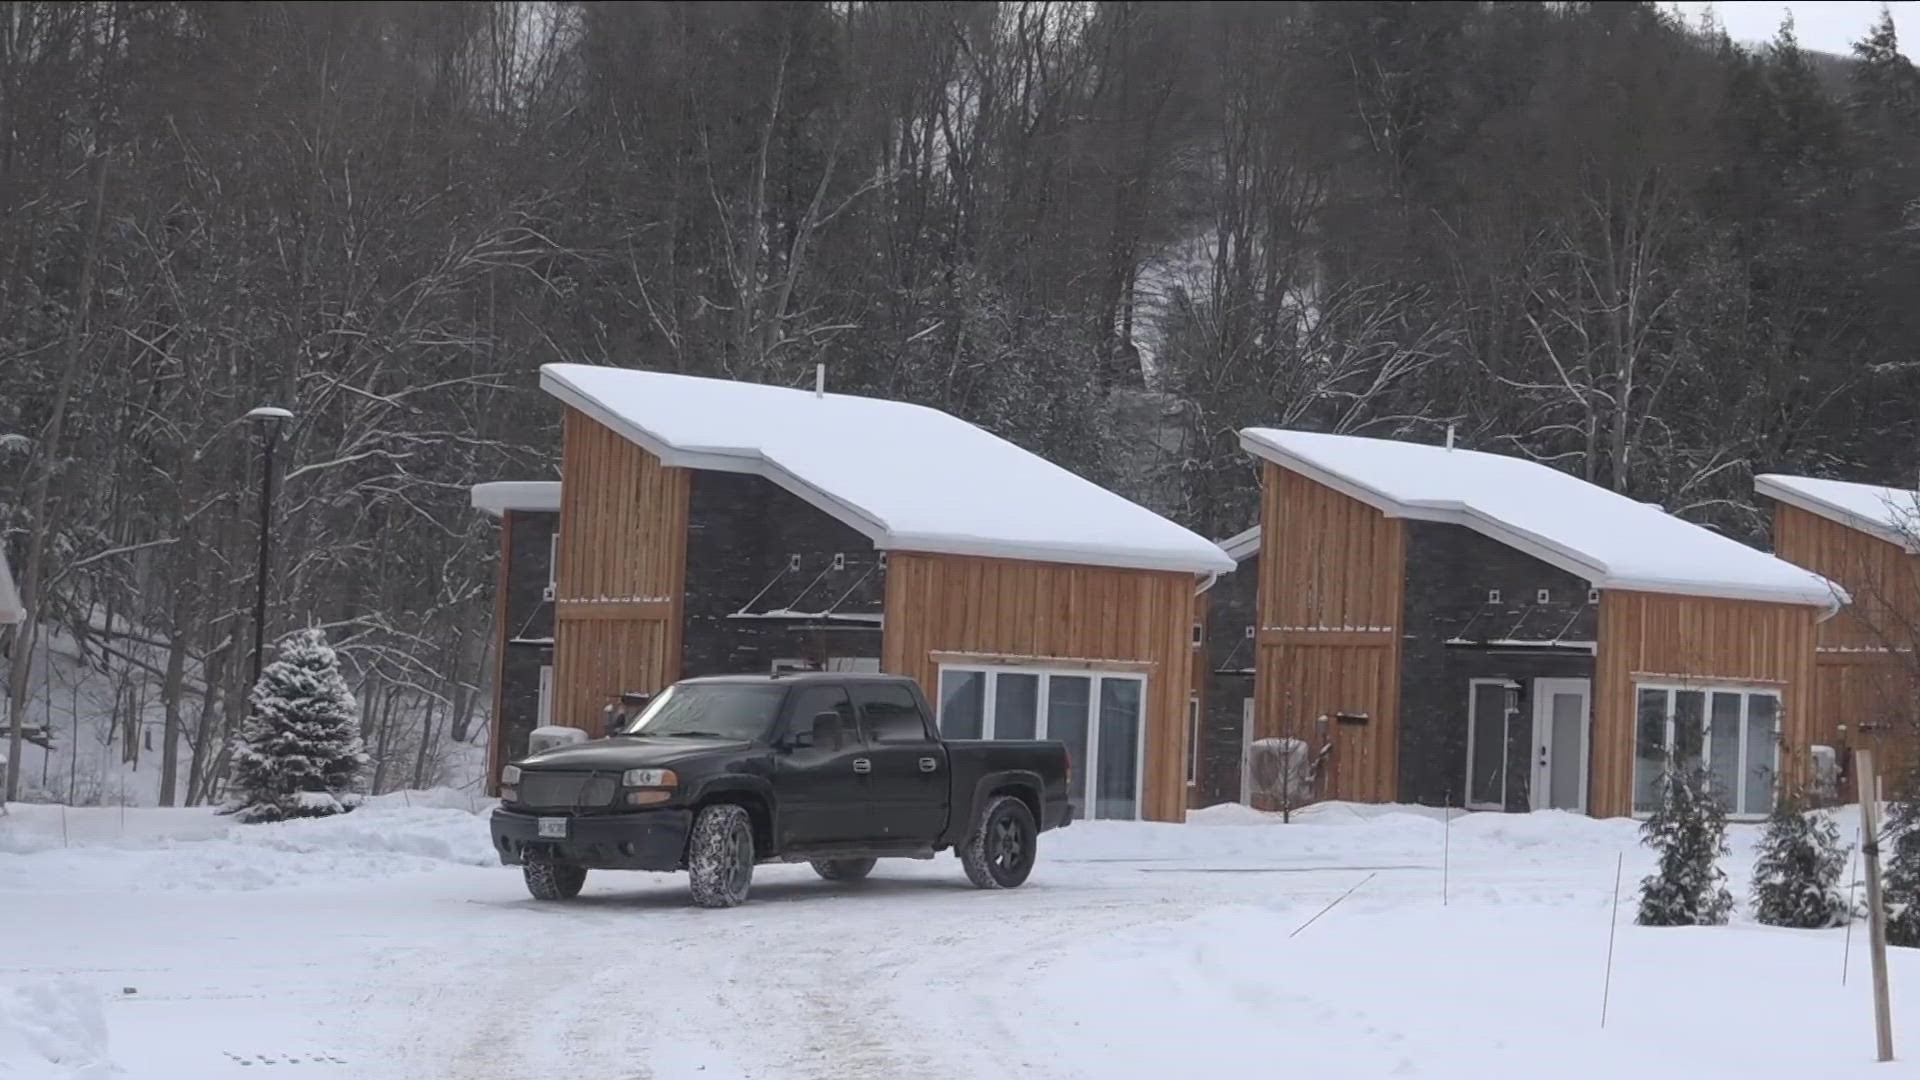 Basecamp tiny home village now open in Ellicottville